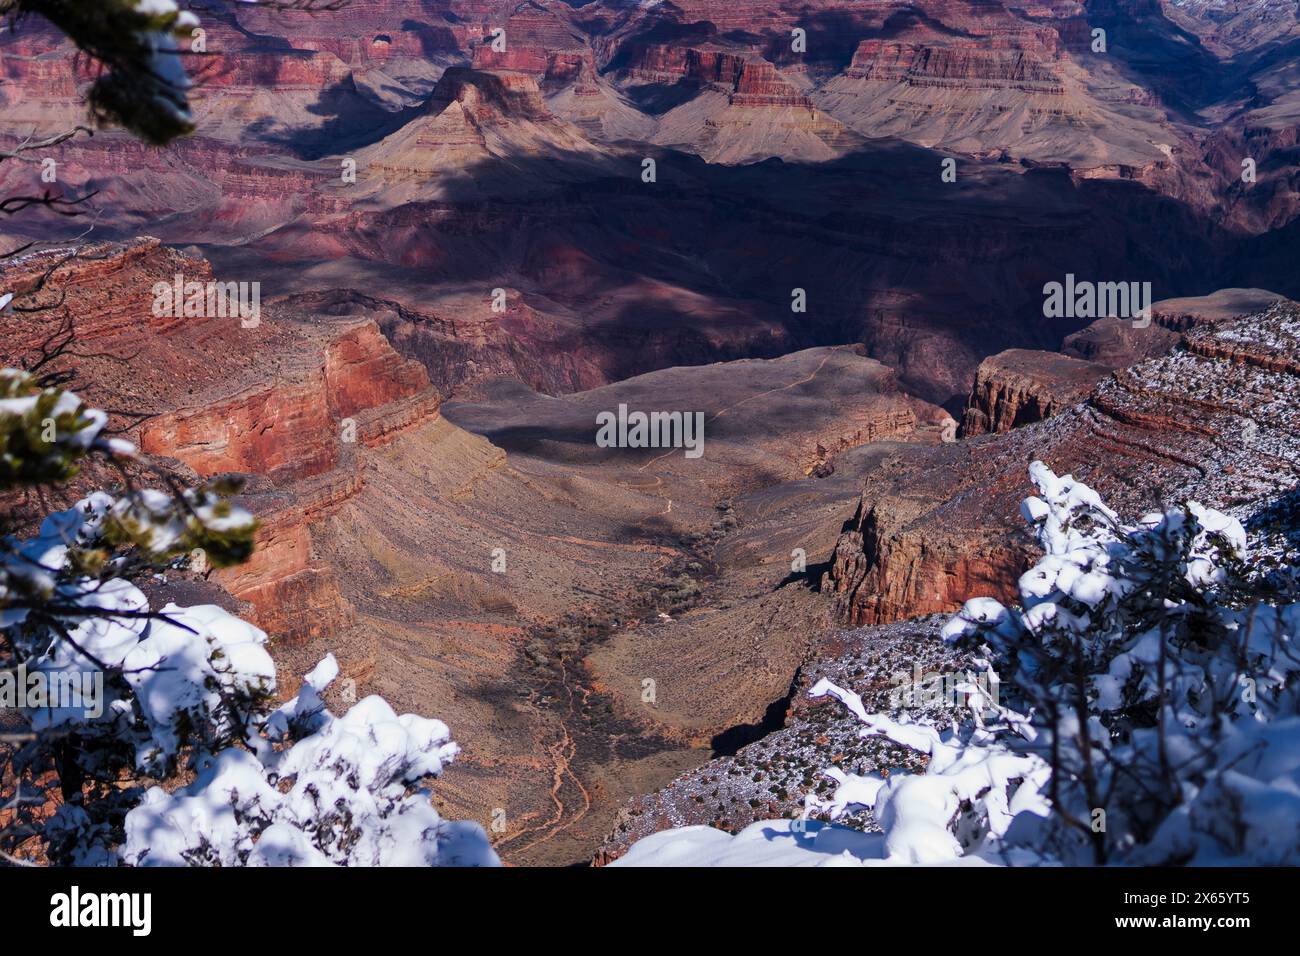 Snowy Overlook at Grand Canyon: Vast Landscapes and Deep Gorges Stock Photo